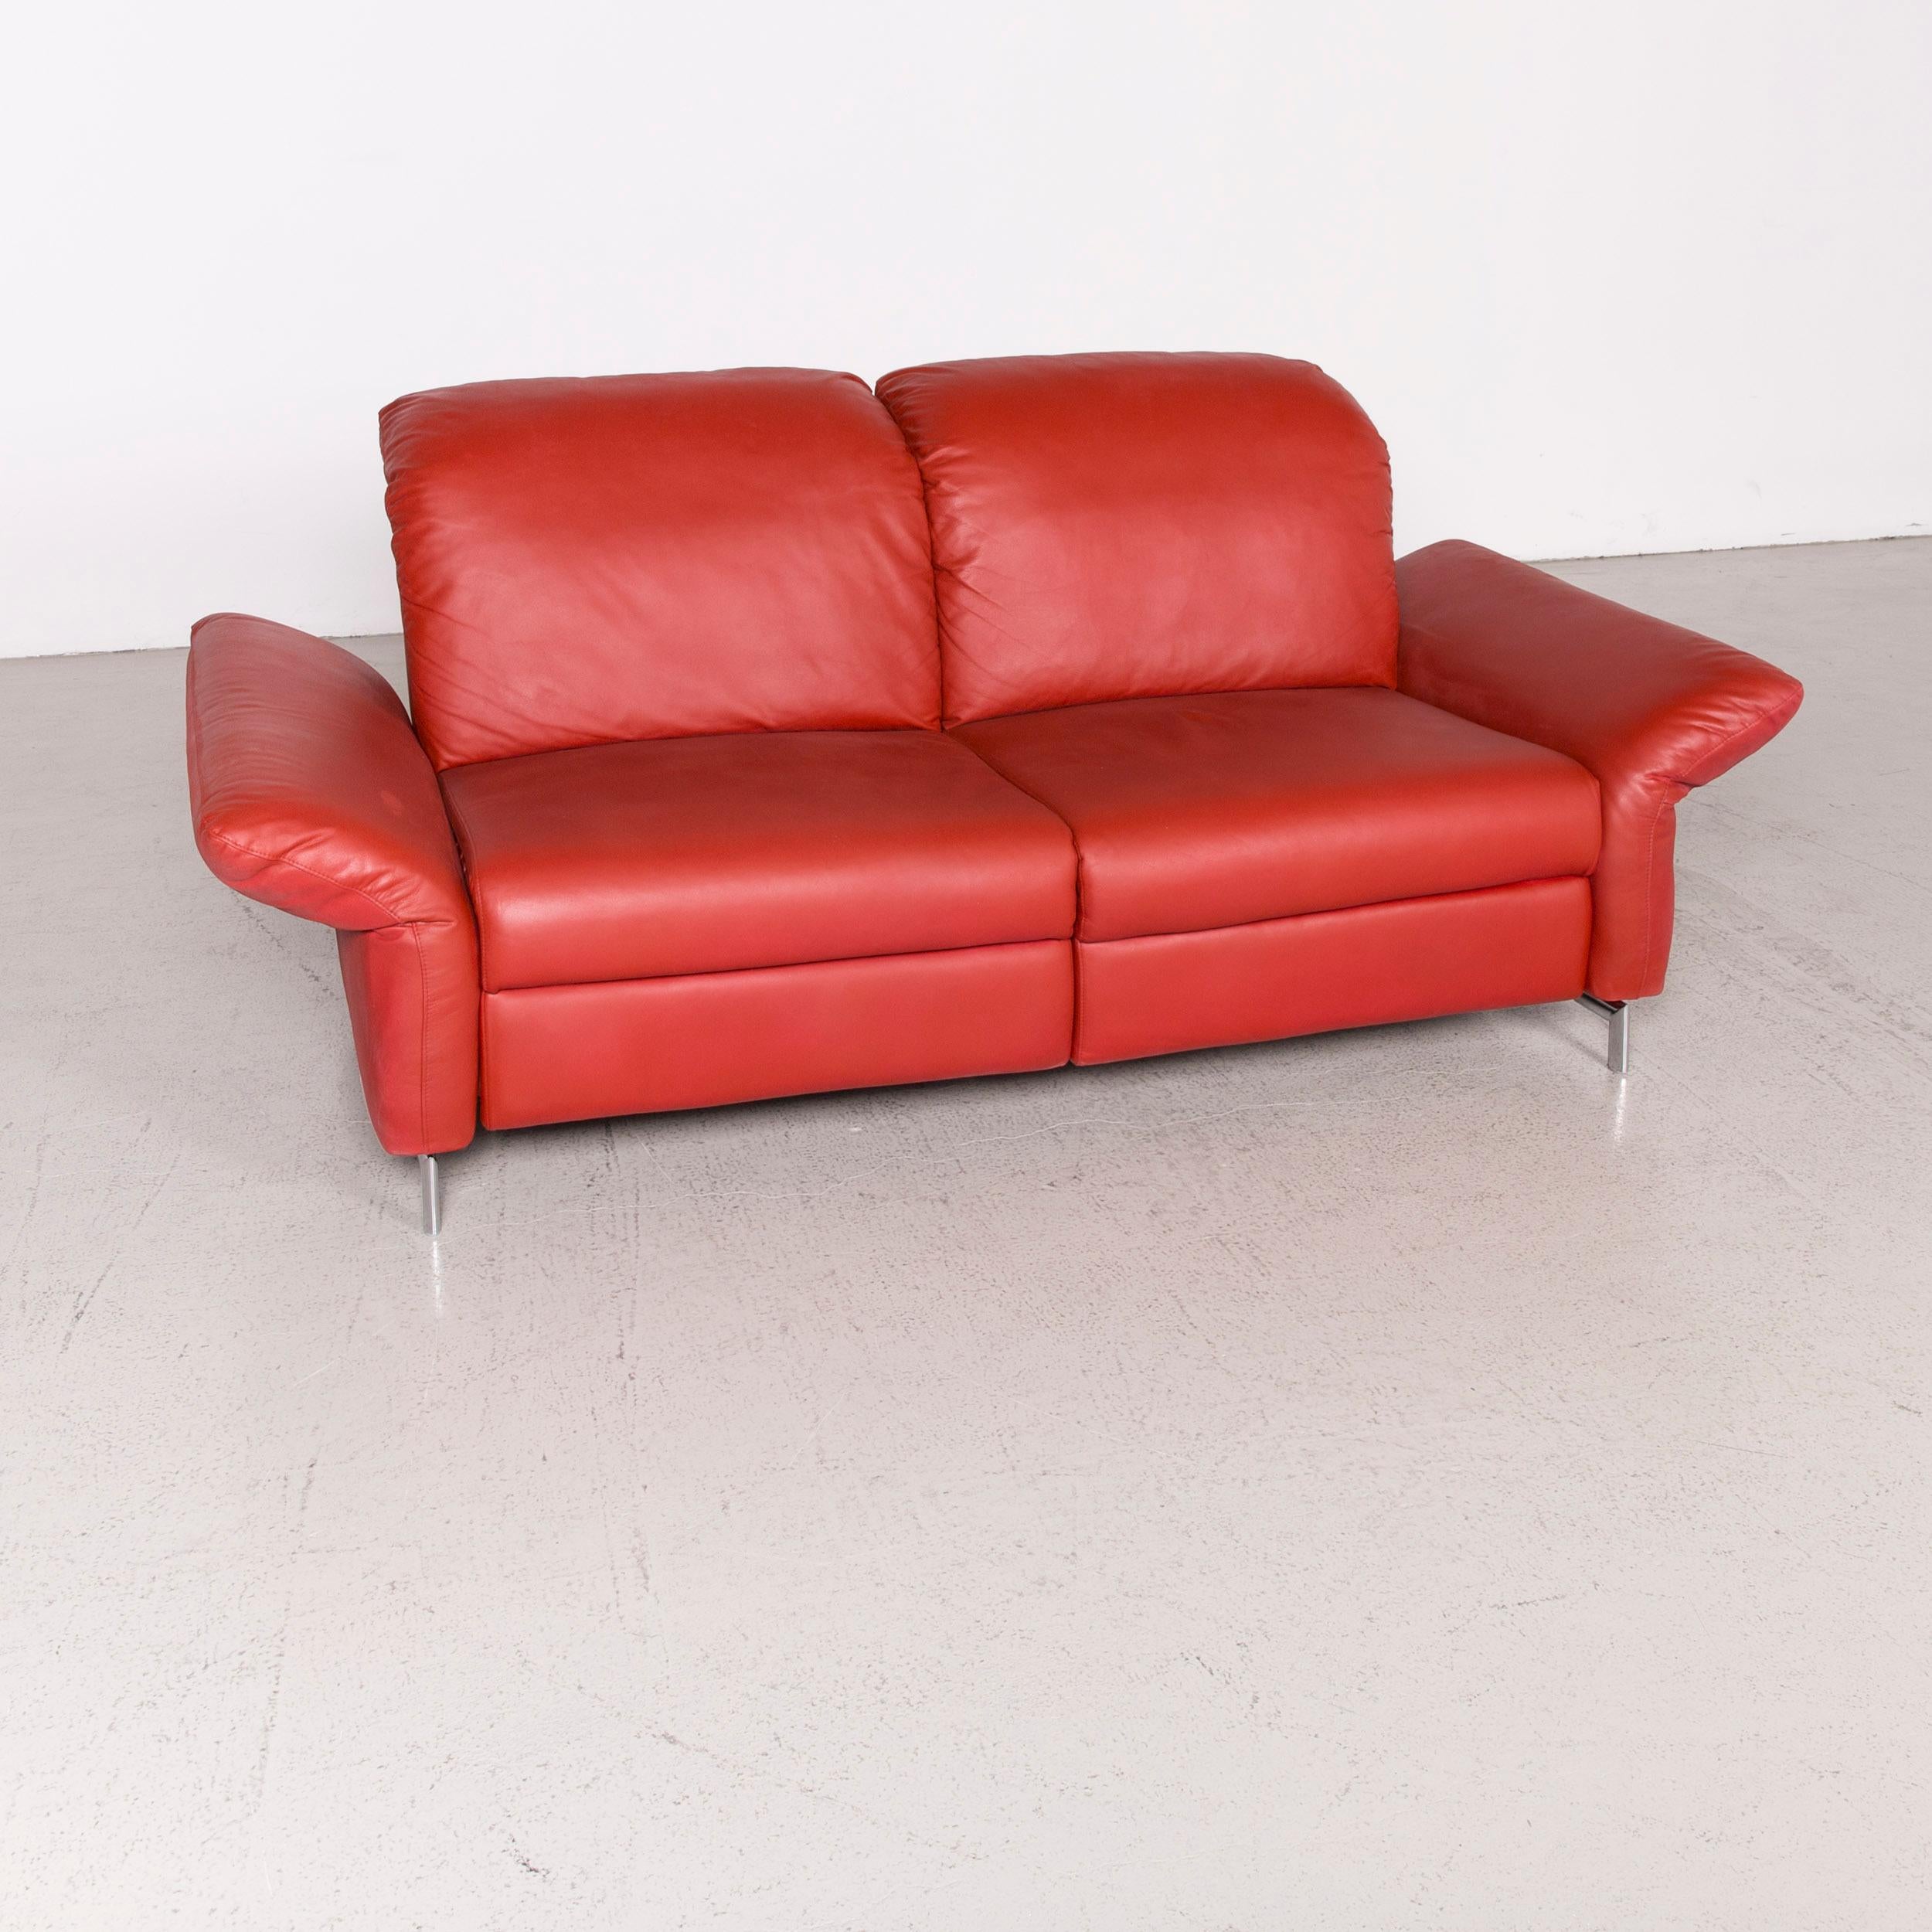 We bring to you a Willi Schillig Siena designer leather sofa red real leather dreisityer couch.
 

Product measures in centimeters:

Depth: 100
Width: 215
Height: 105
Seat-height: 50
Rest-height: 55
Seat-depth: 55
Seat-width: